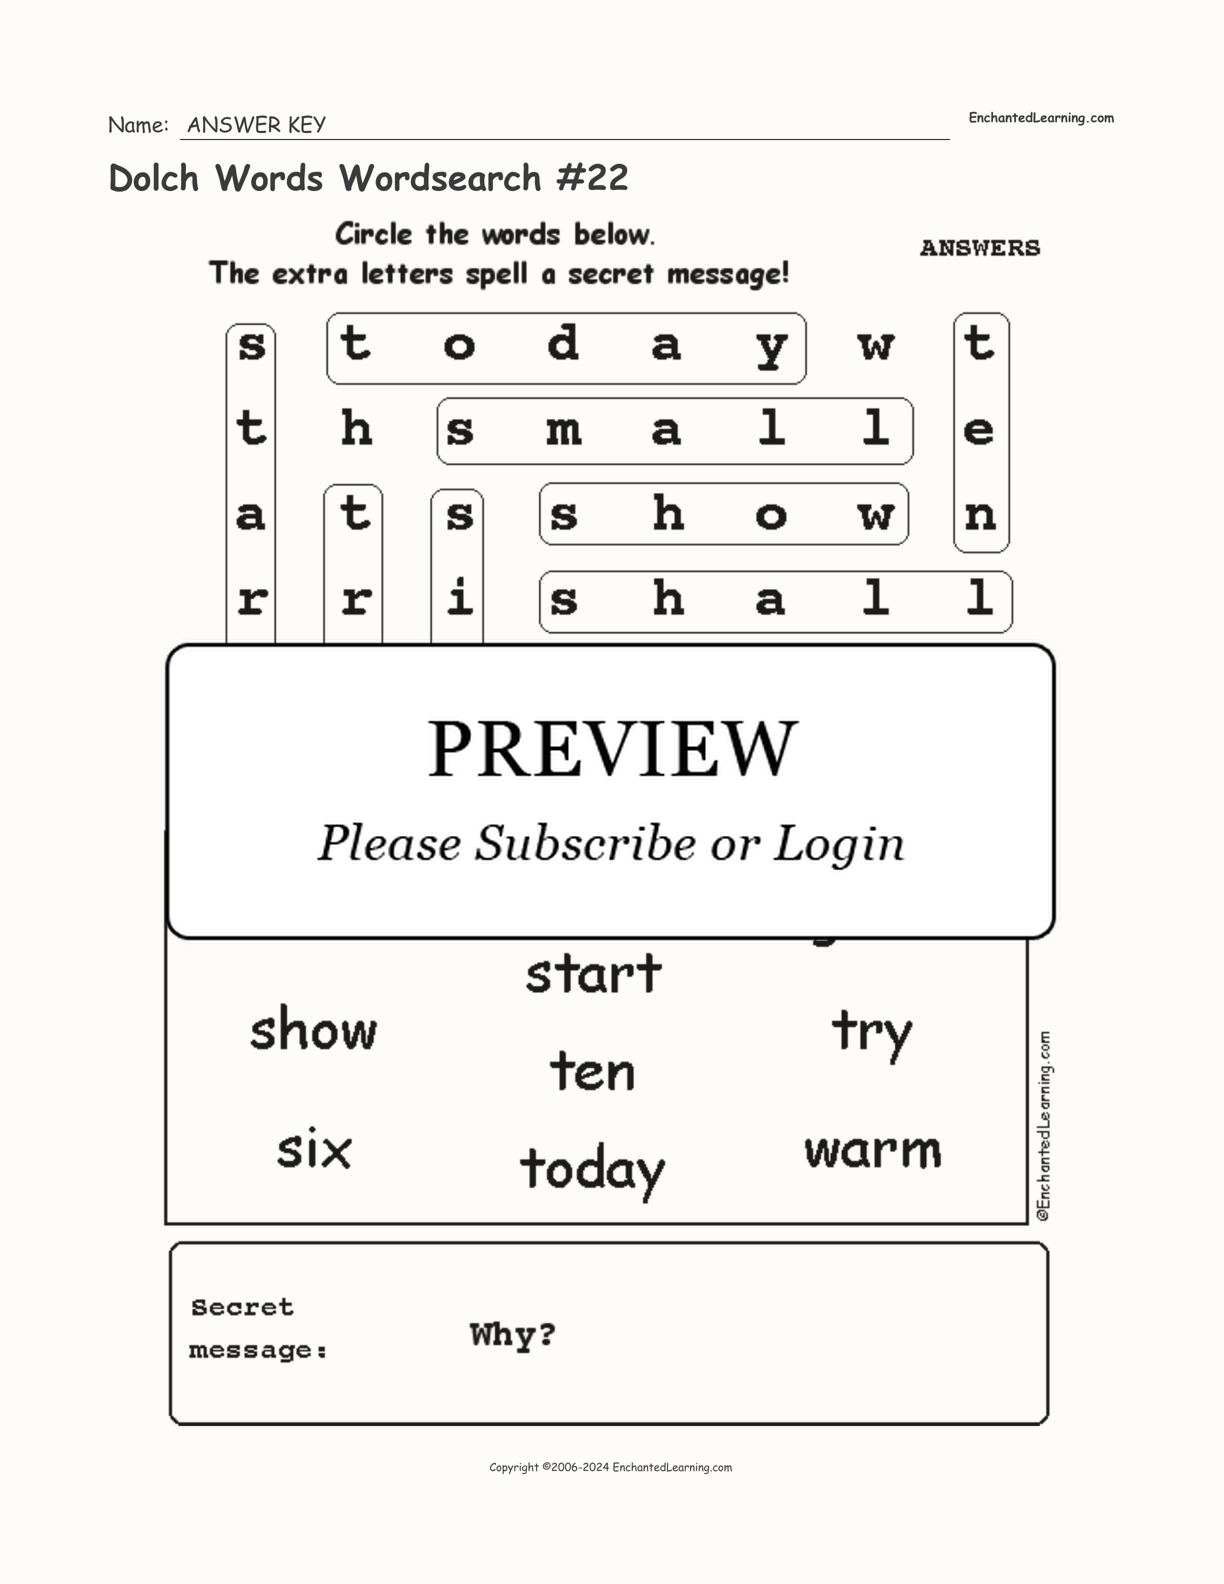 Dolch Words Wordsearch #22 interactive worksheet page 2